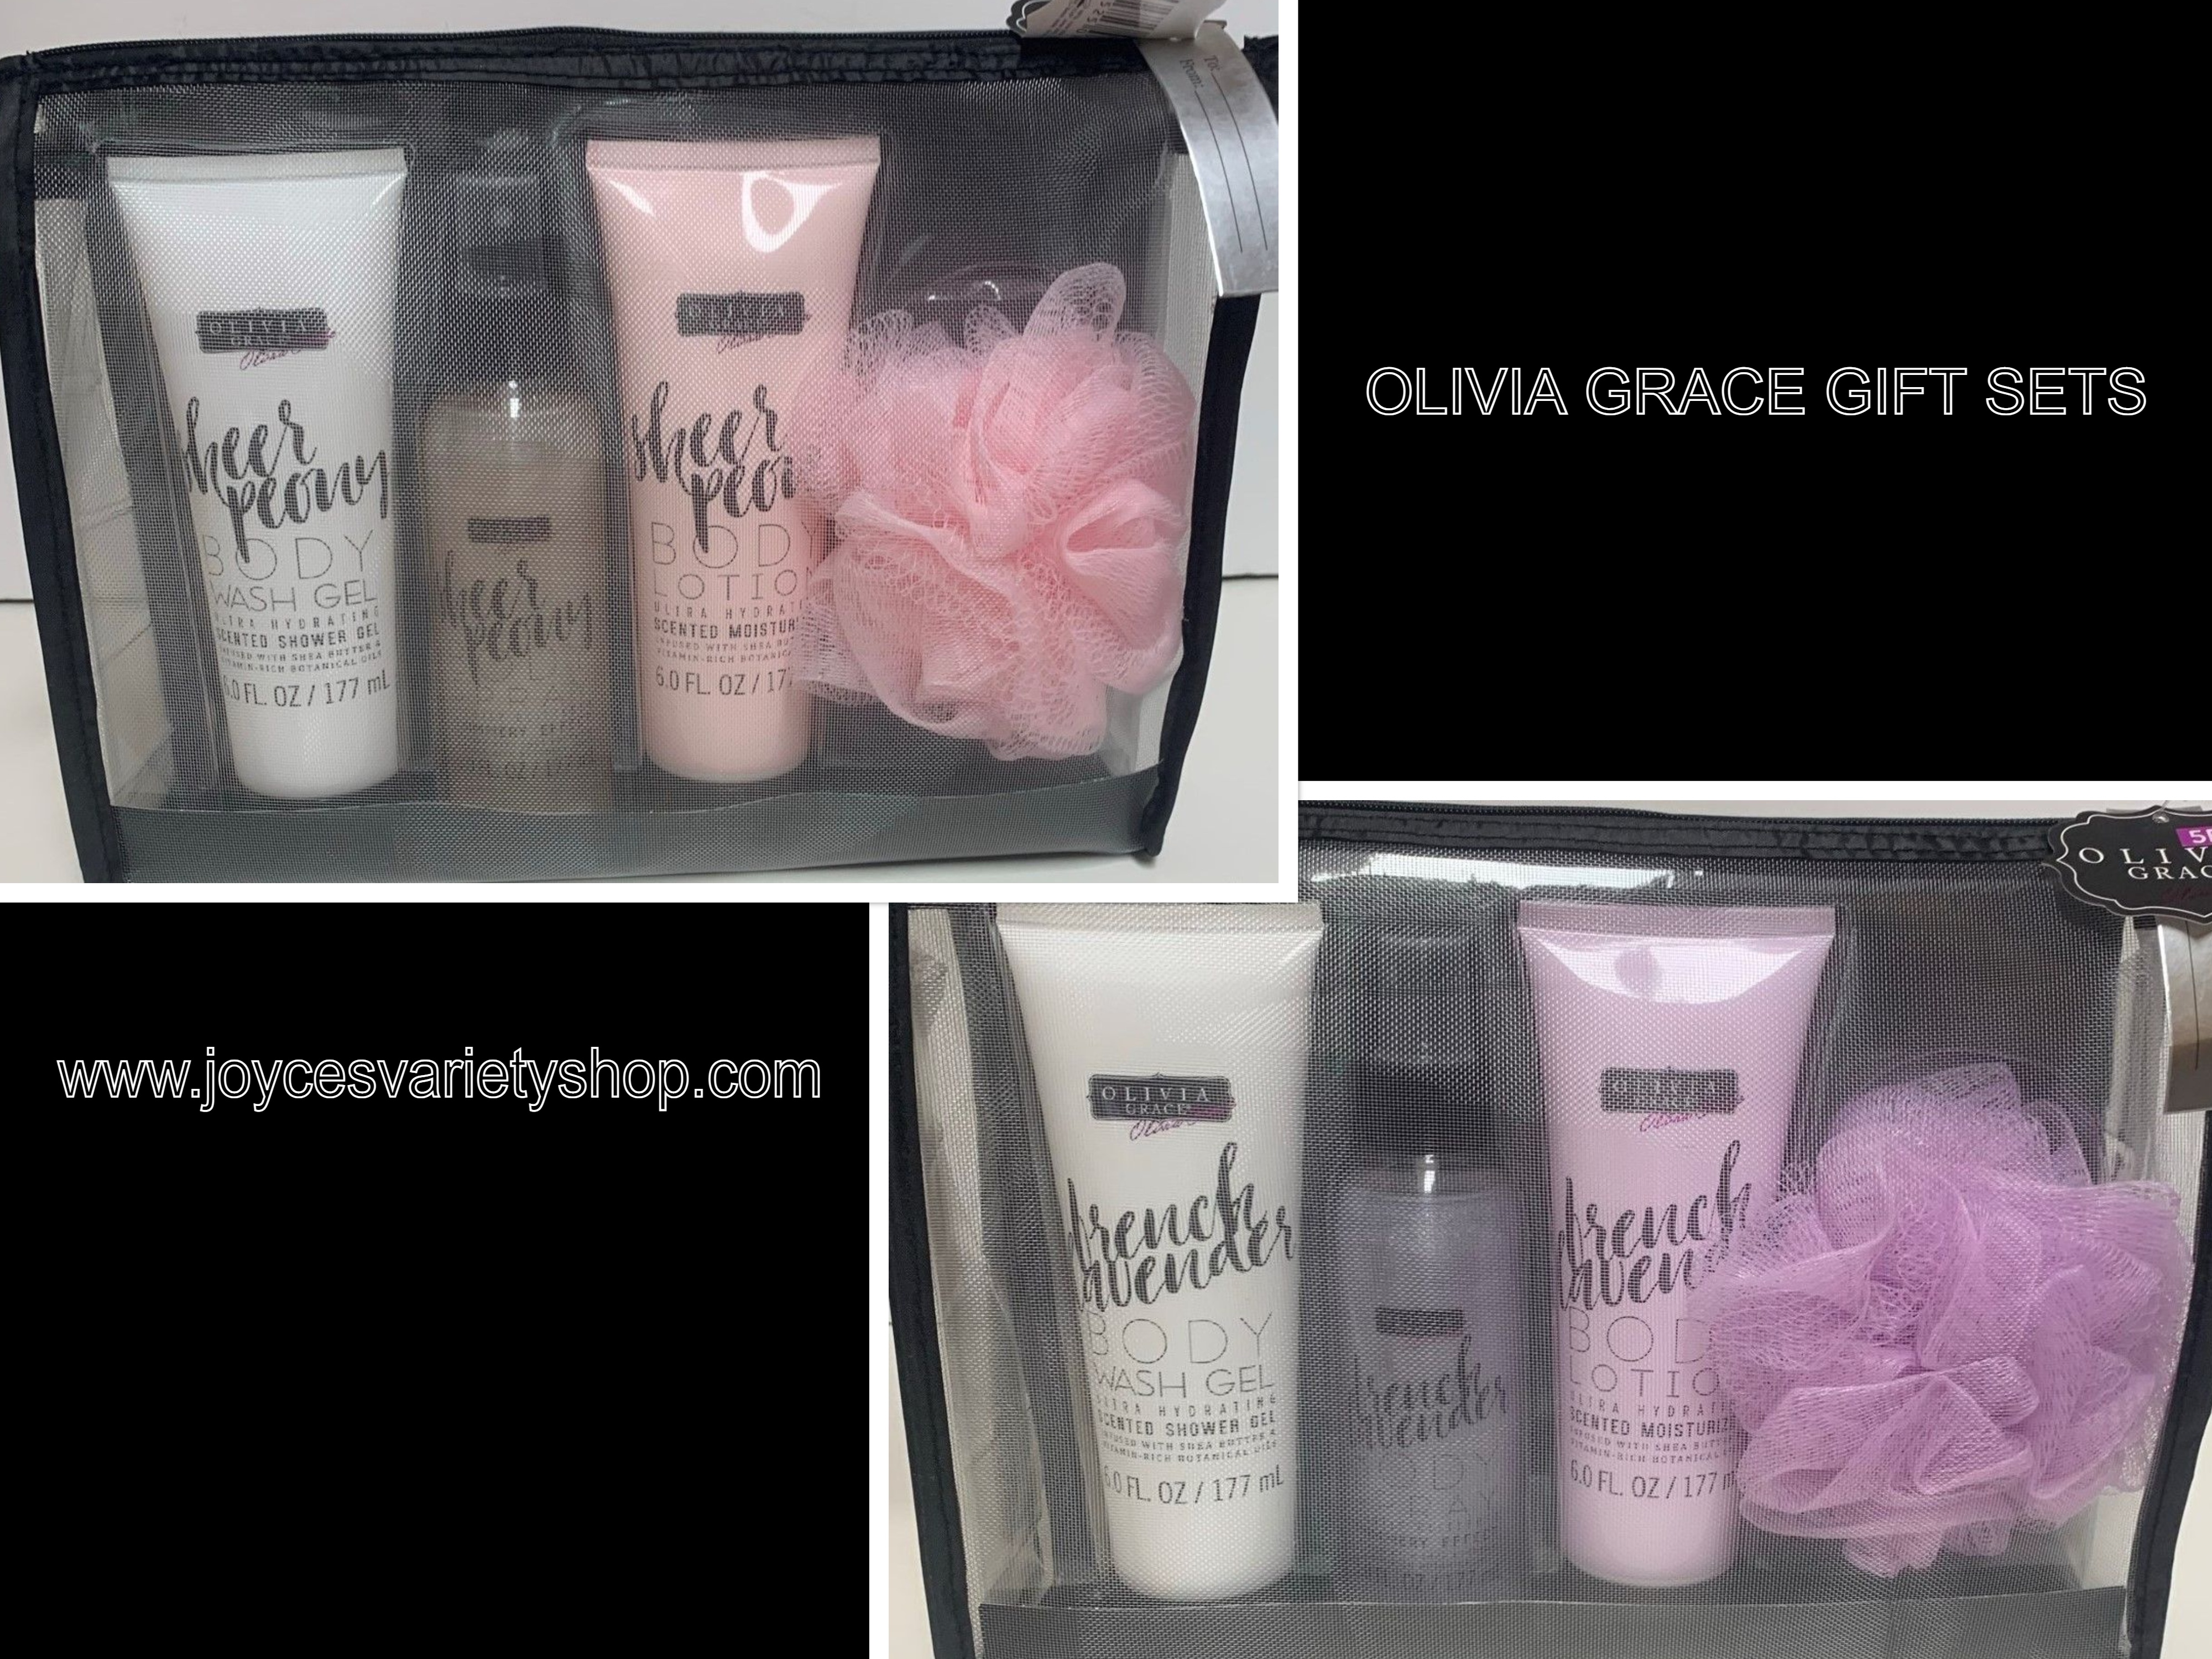 Olivia Grace Scented Gift Sets 5 PC Bath & Shower Accessories w/Travel Case